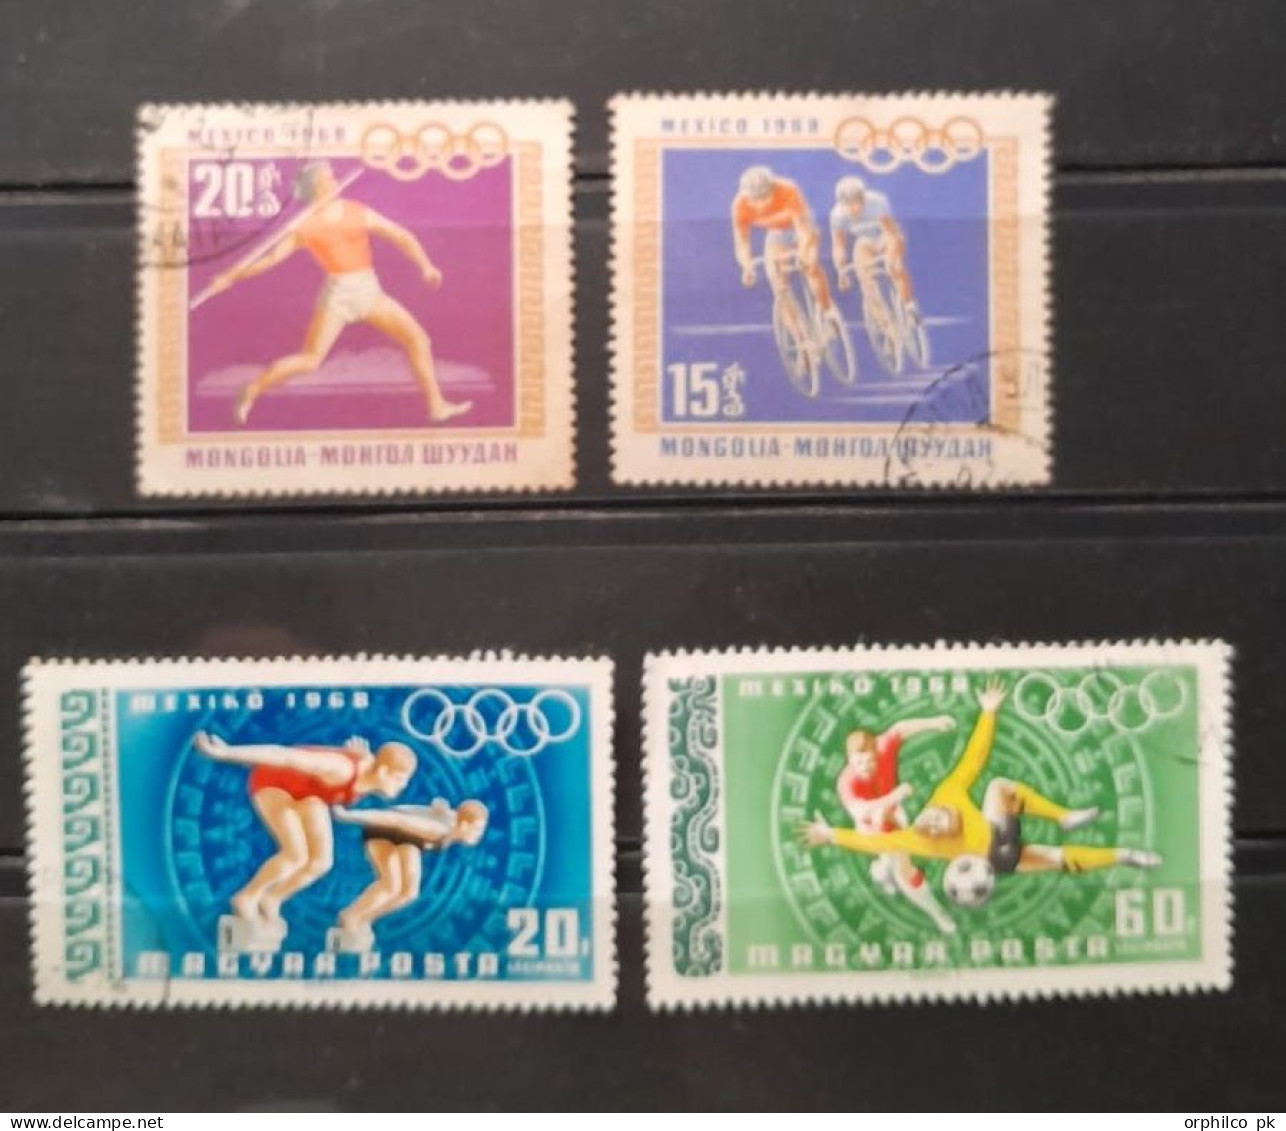 MEXICO CITY Olympic 1968 USED Javelin Cycling Swiming Football Coccer Mongolia Hungery Gold Medal - Summer 1968: Mexico City